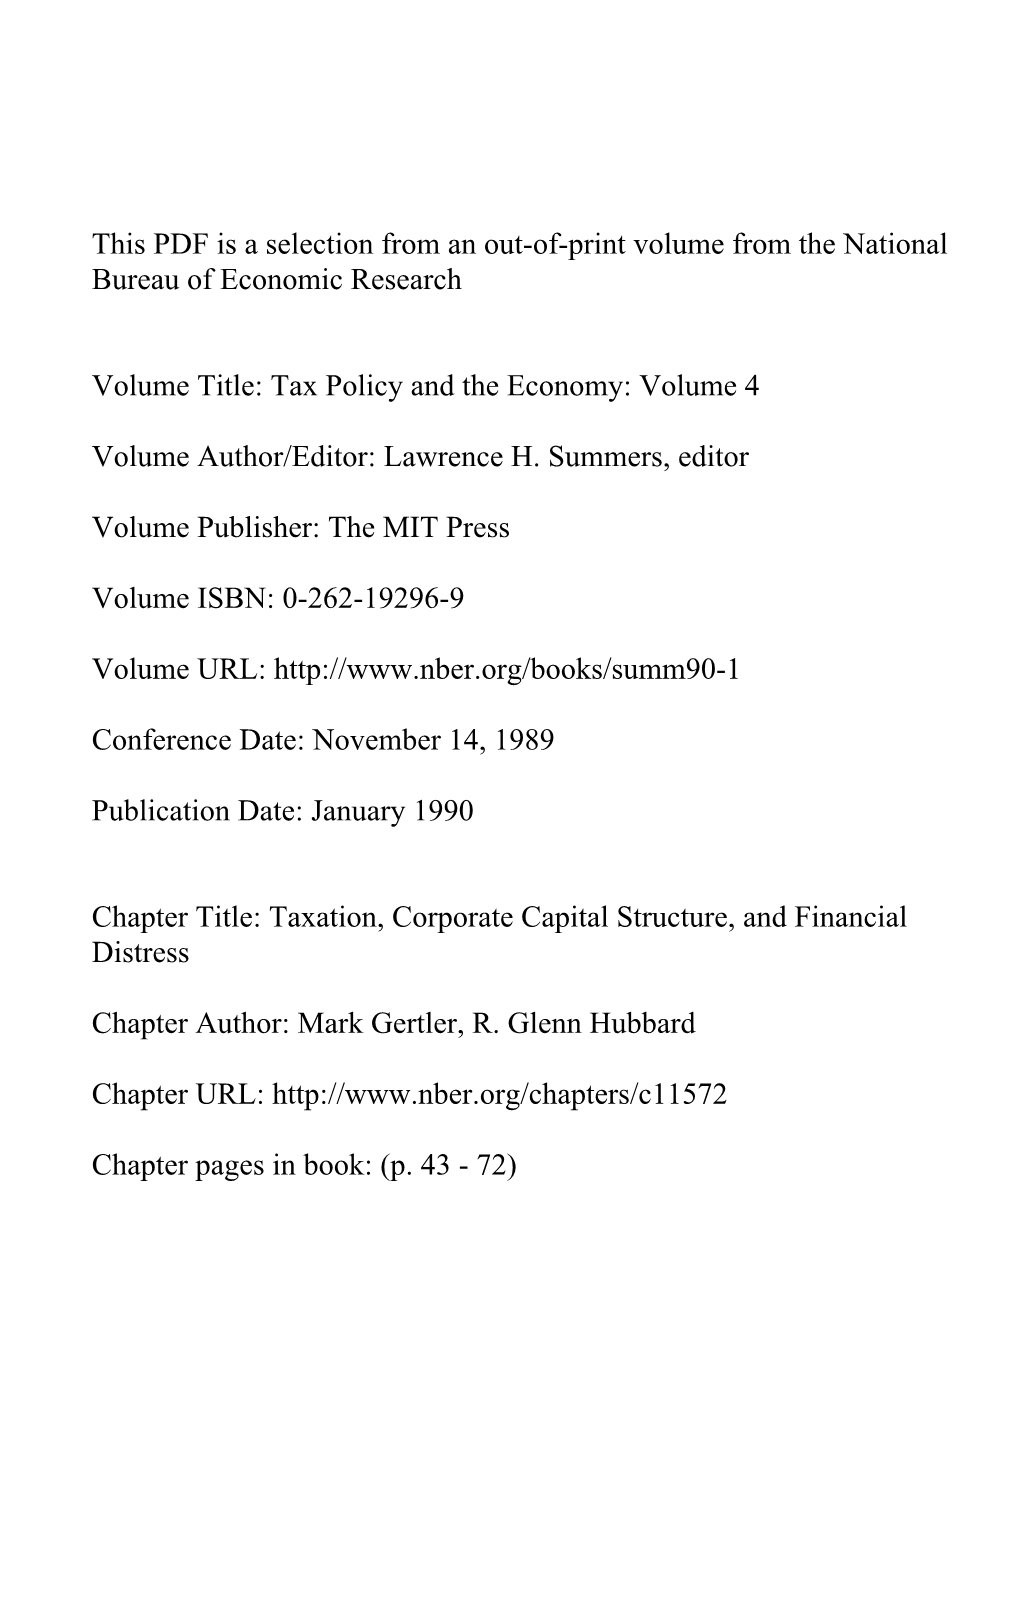 Taxation, Corporate Capital Structure, and Financial Distress